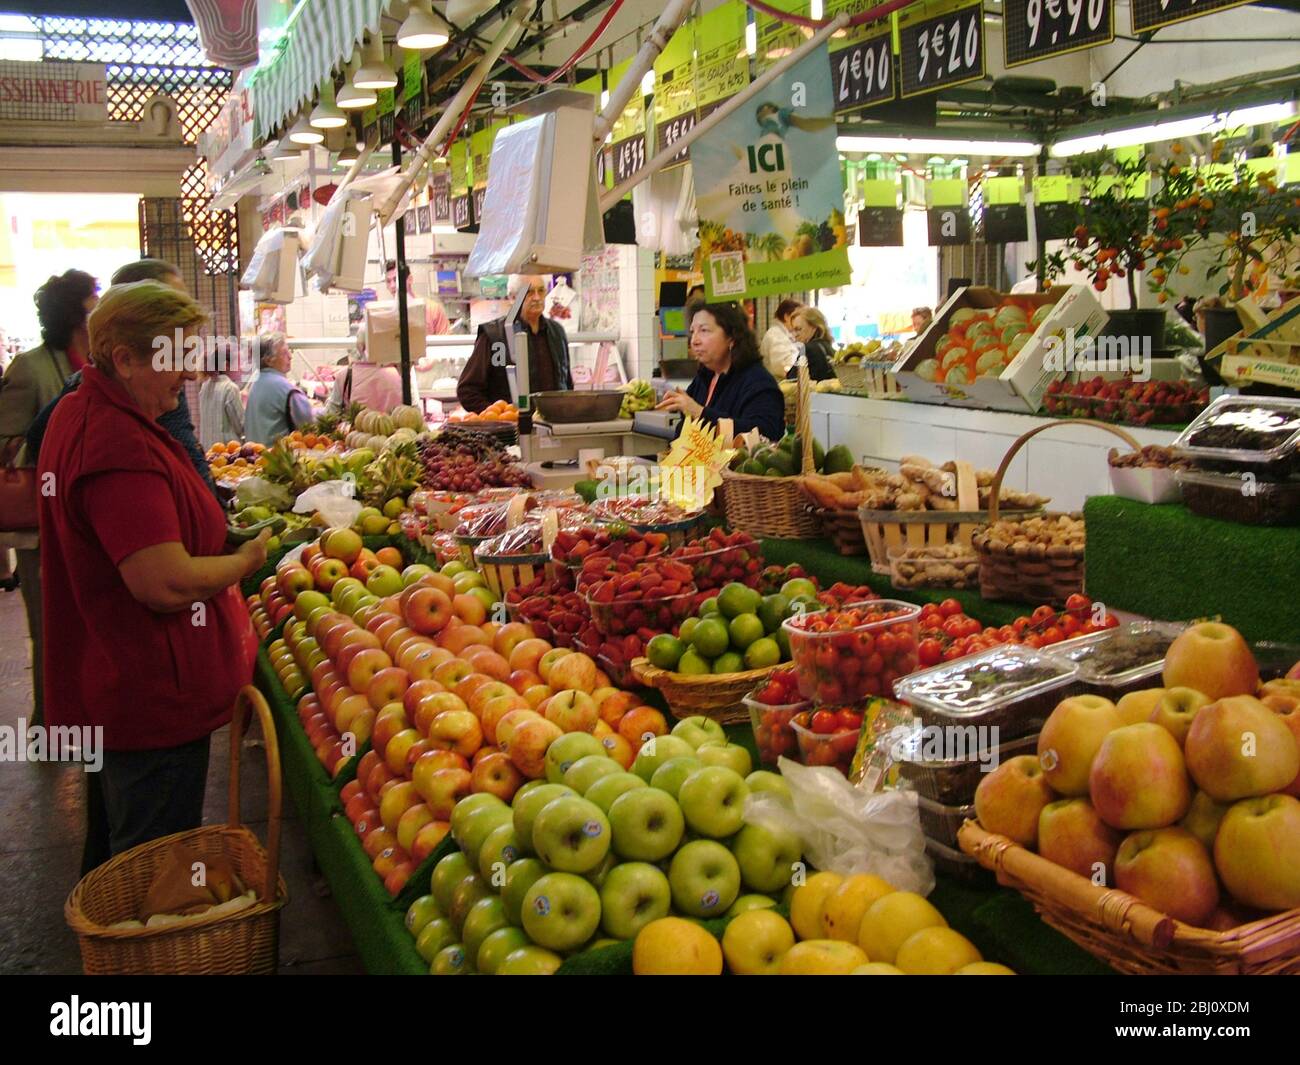 Shopping for fruit in the covered market in Menton, south of France - Stock Photo